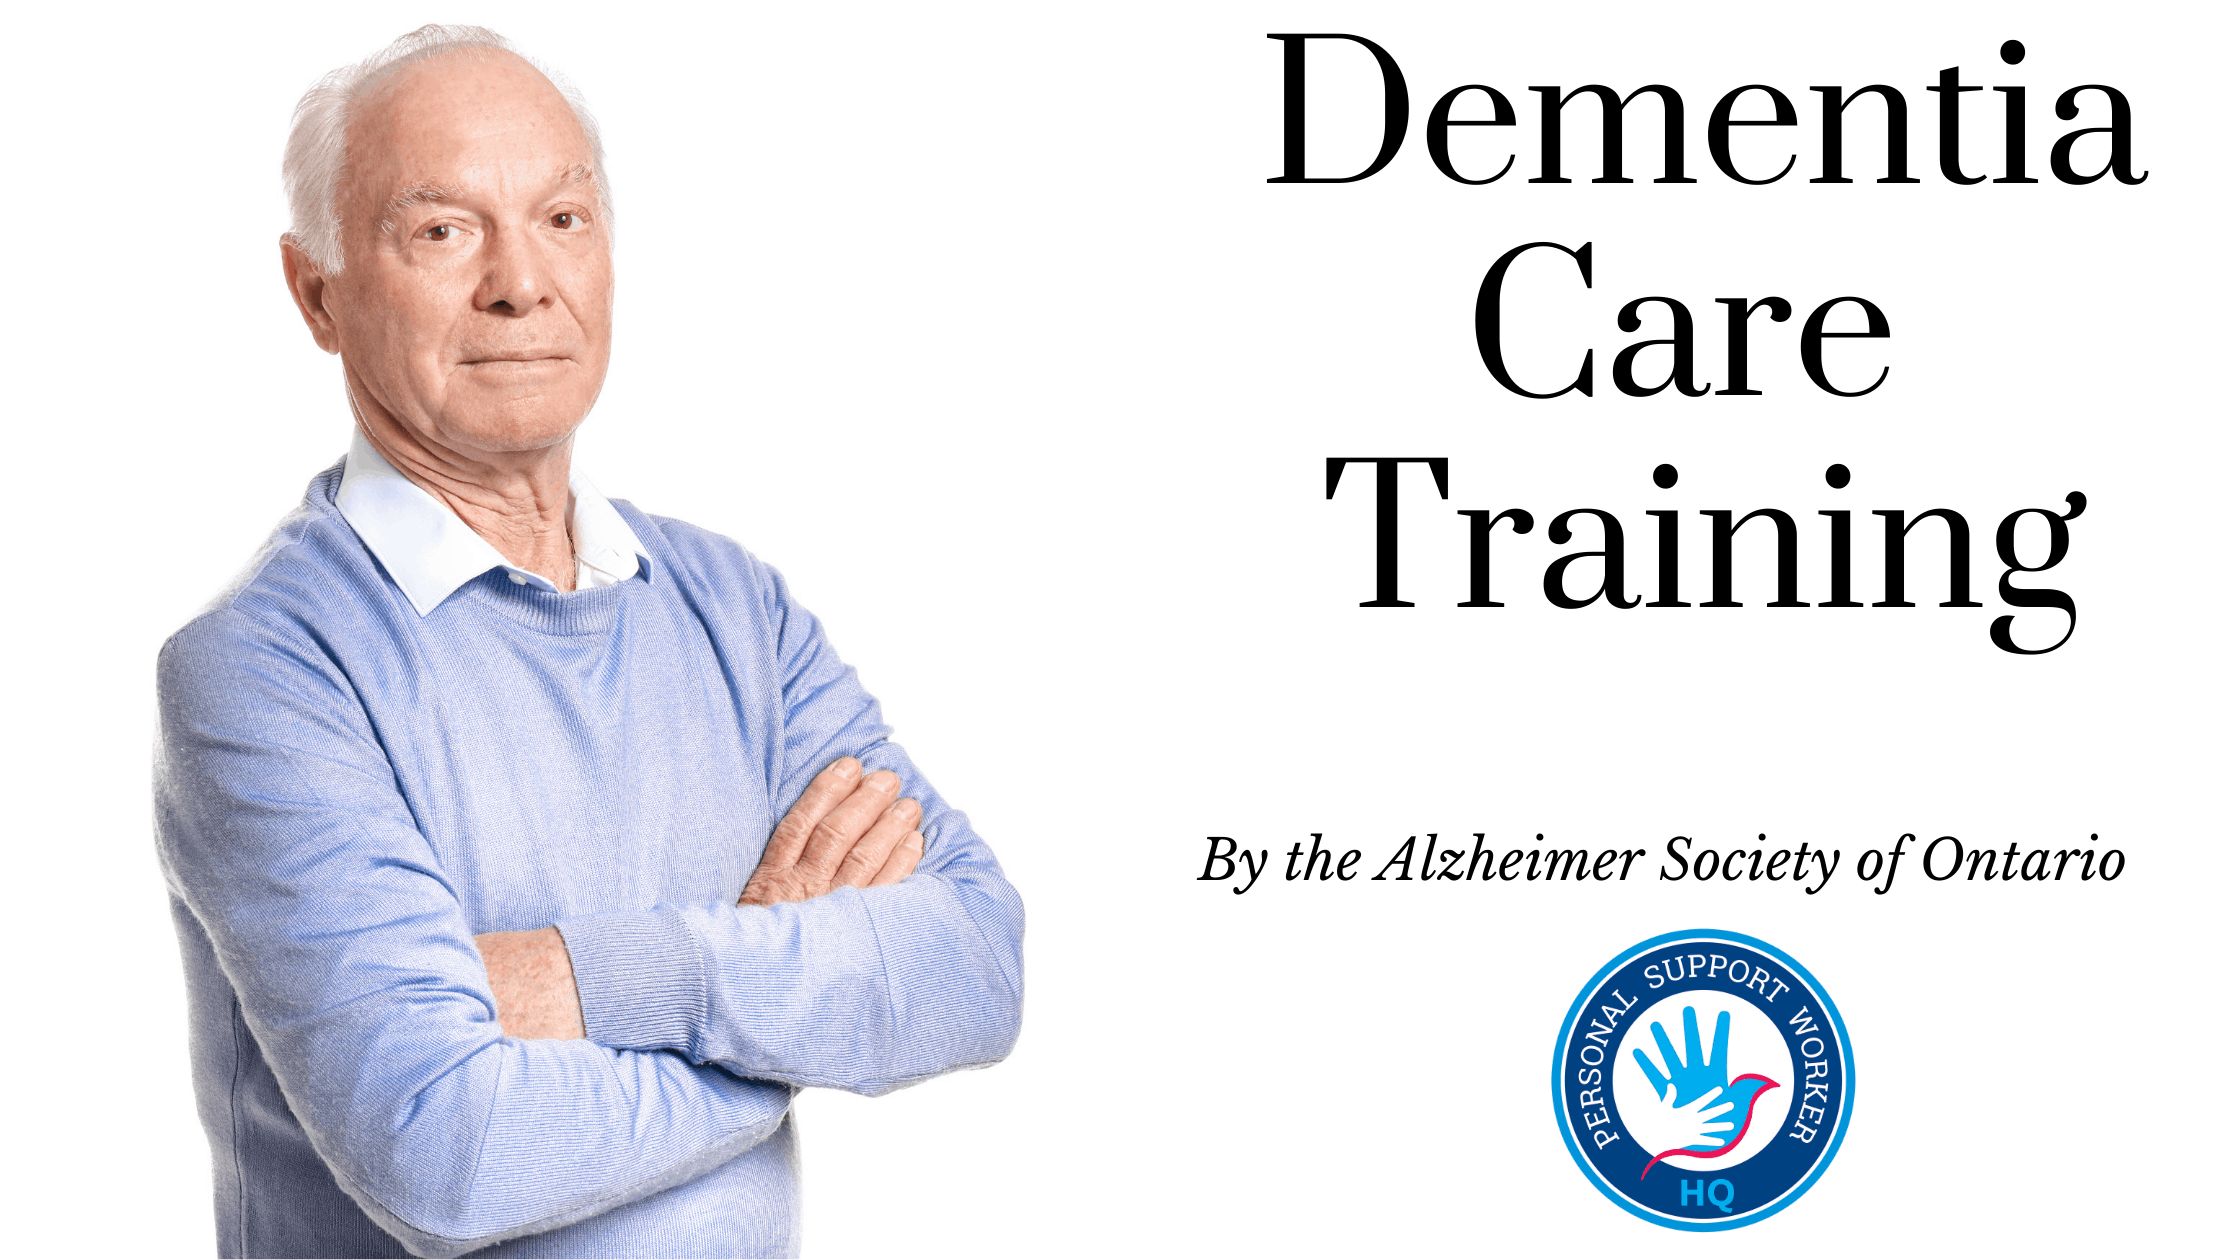 Dementia Care Training for PSWs by the Alzheimer Society of Ontario